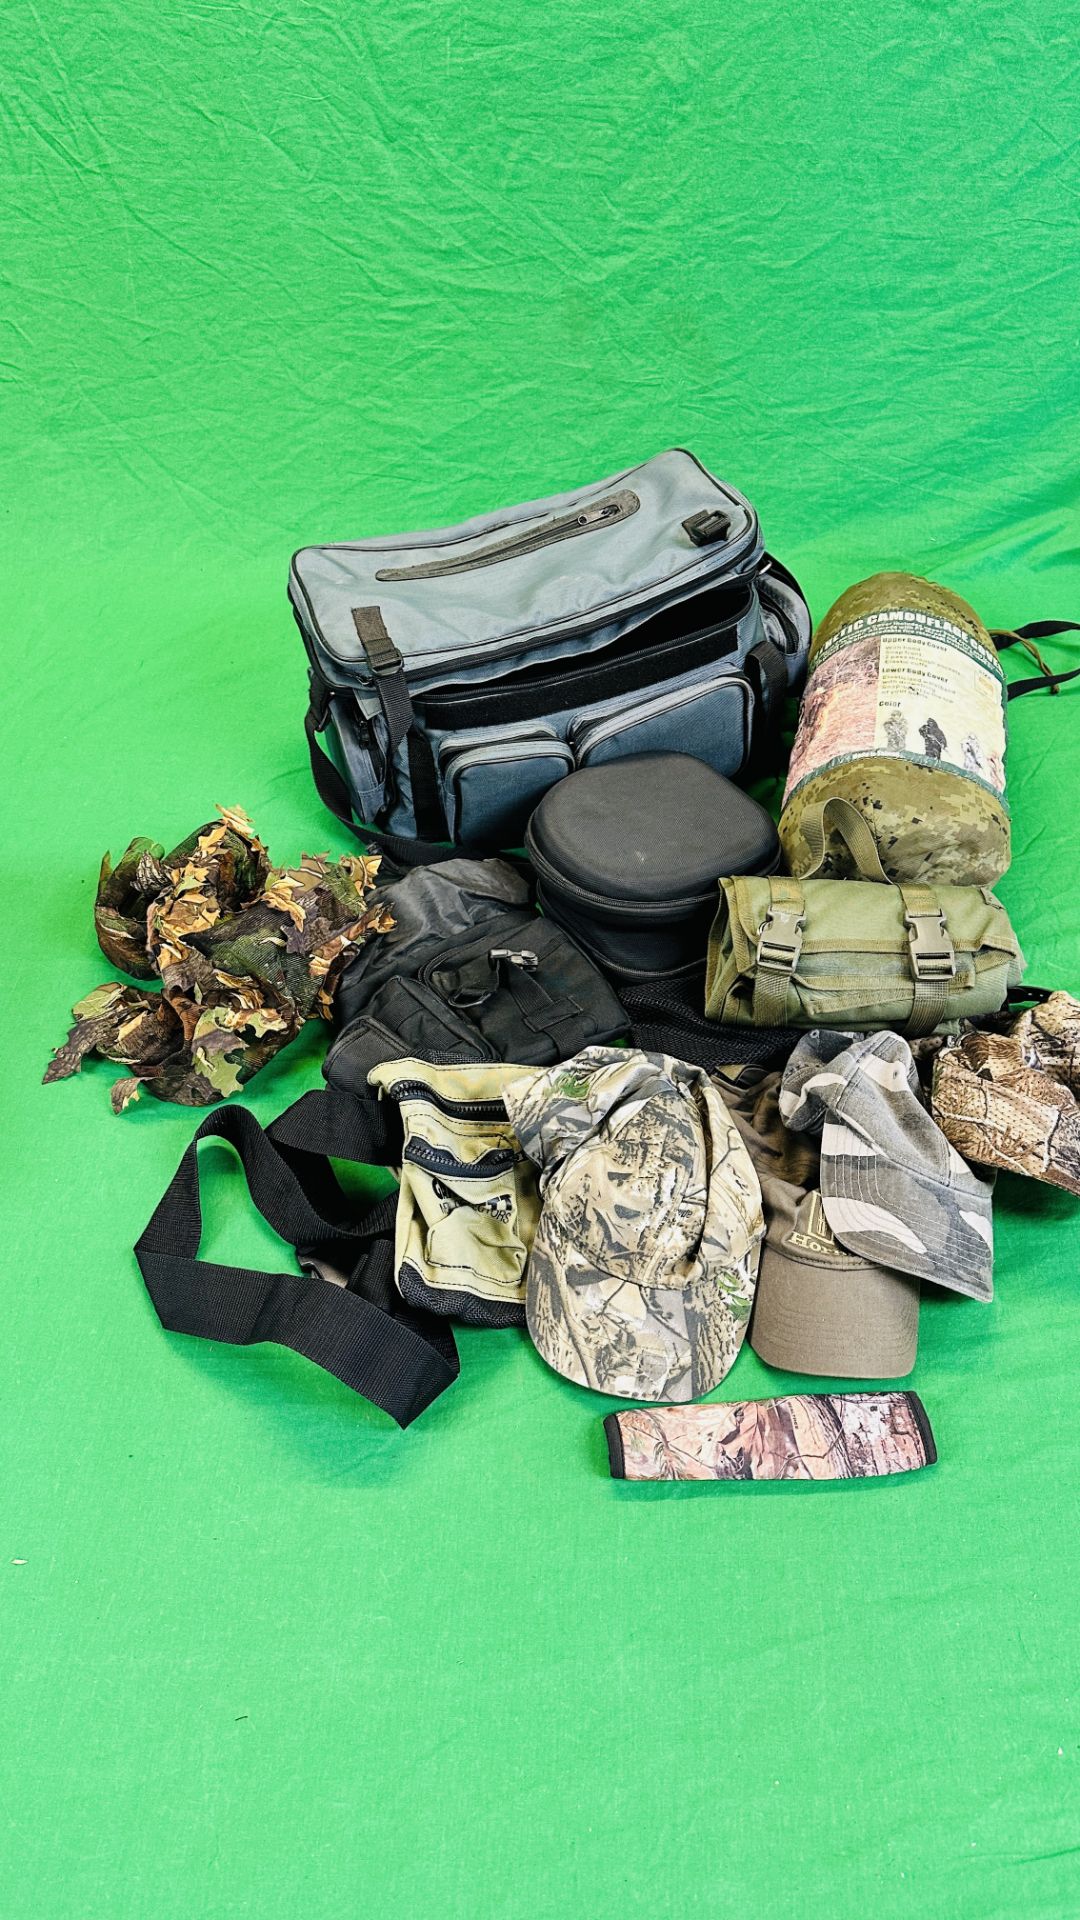 A GROUP OF SHOOTING ACCESSORIES TO INCLUDE 3-D SYNTHETIC CAMOUFLAGE COVER SUIT XL - 2XL,